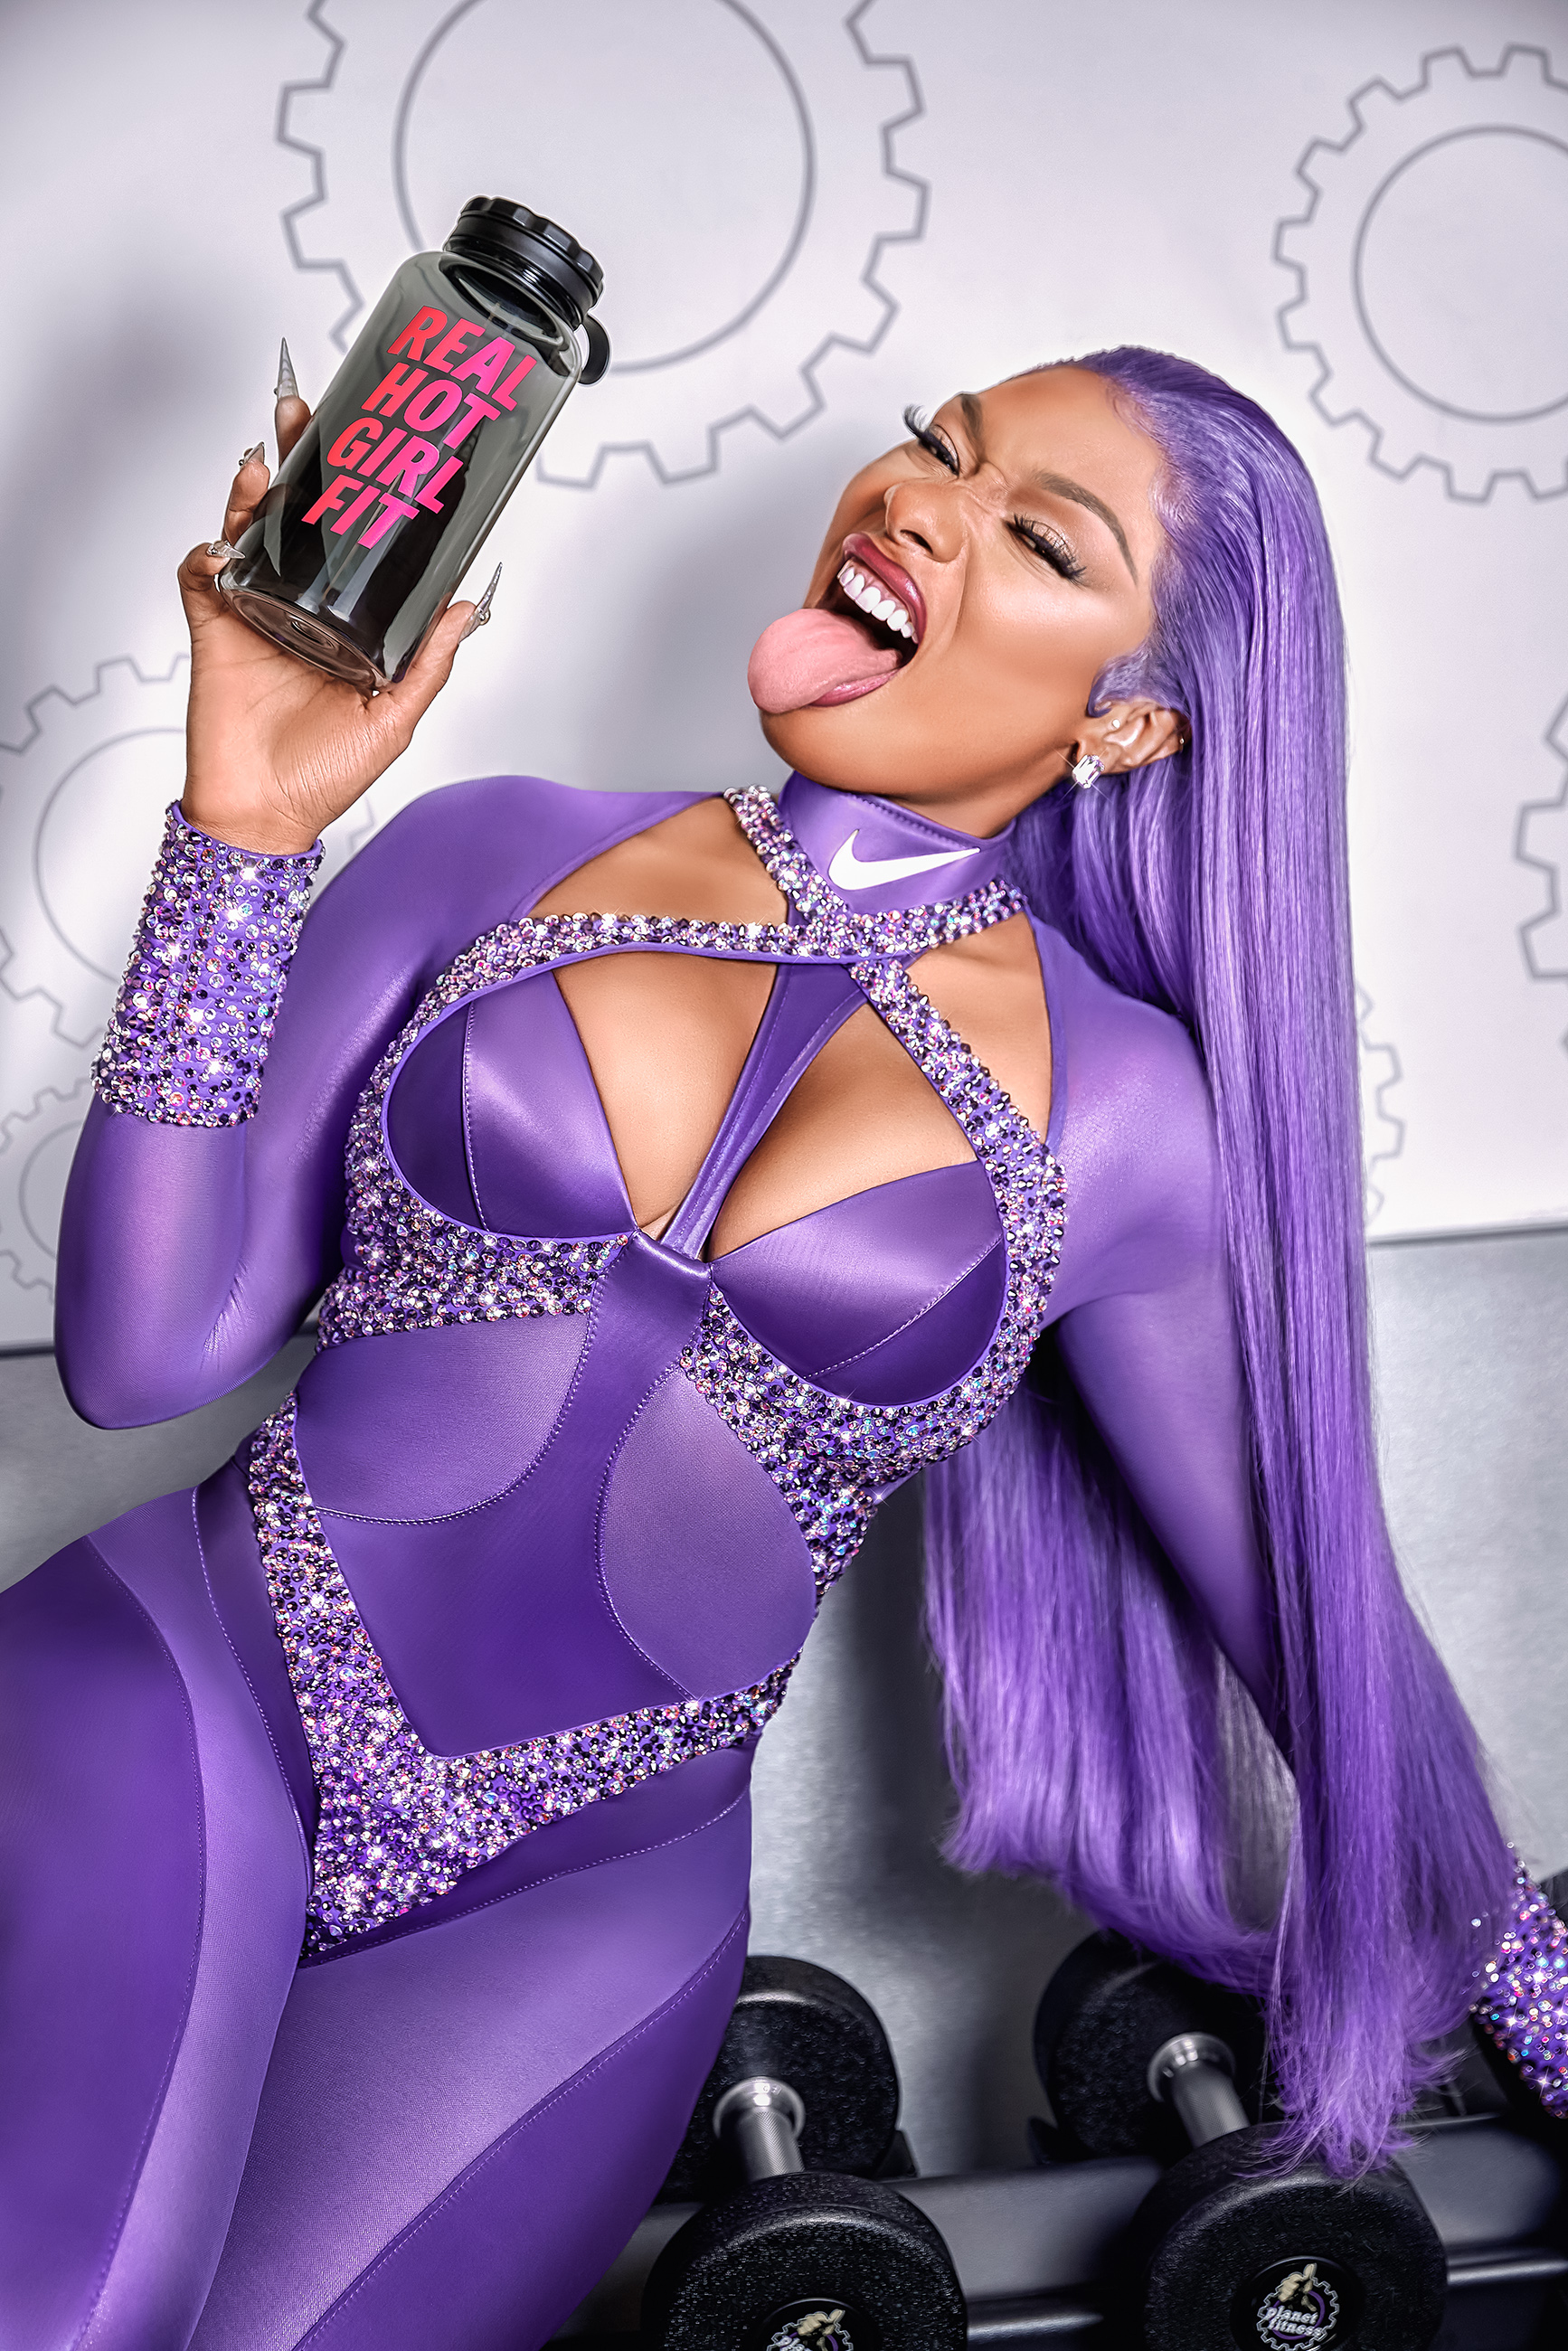 Megan Thee Stallion as Mother Fitness Posing with Planet Fitness Collab - "Real Hot Girl Fit" Water Bottle